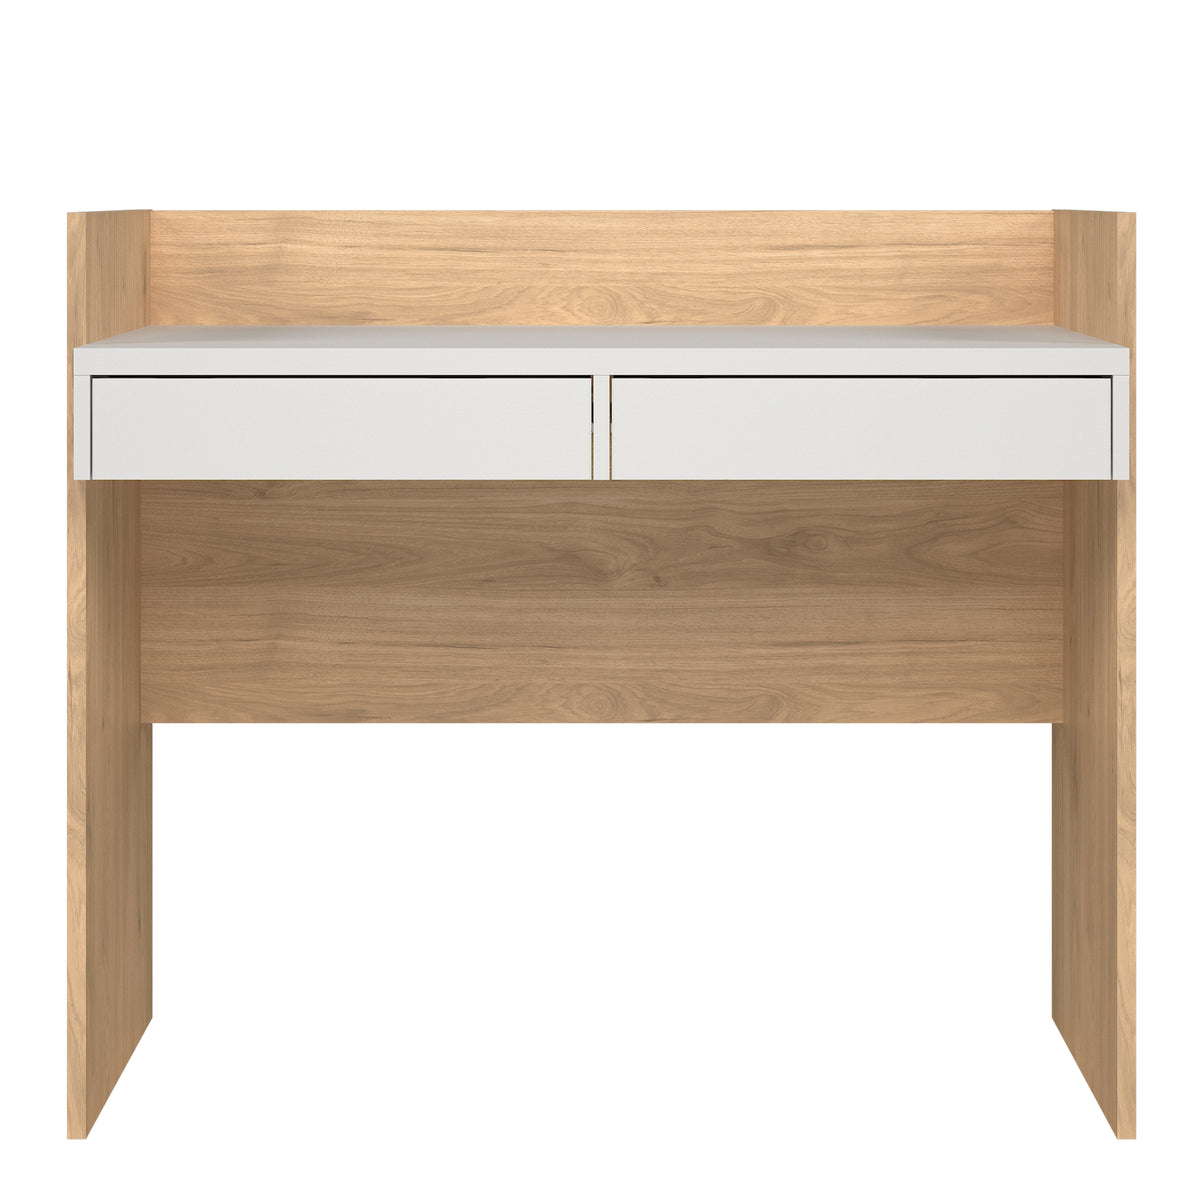 Function Plus Desk 2 Drawers In Jackson Hickory and White